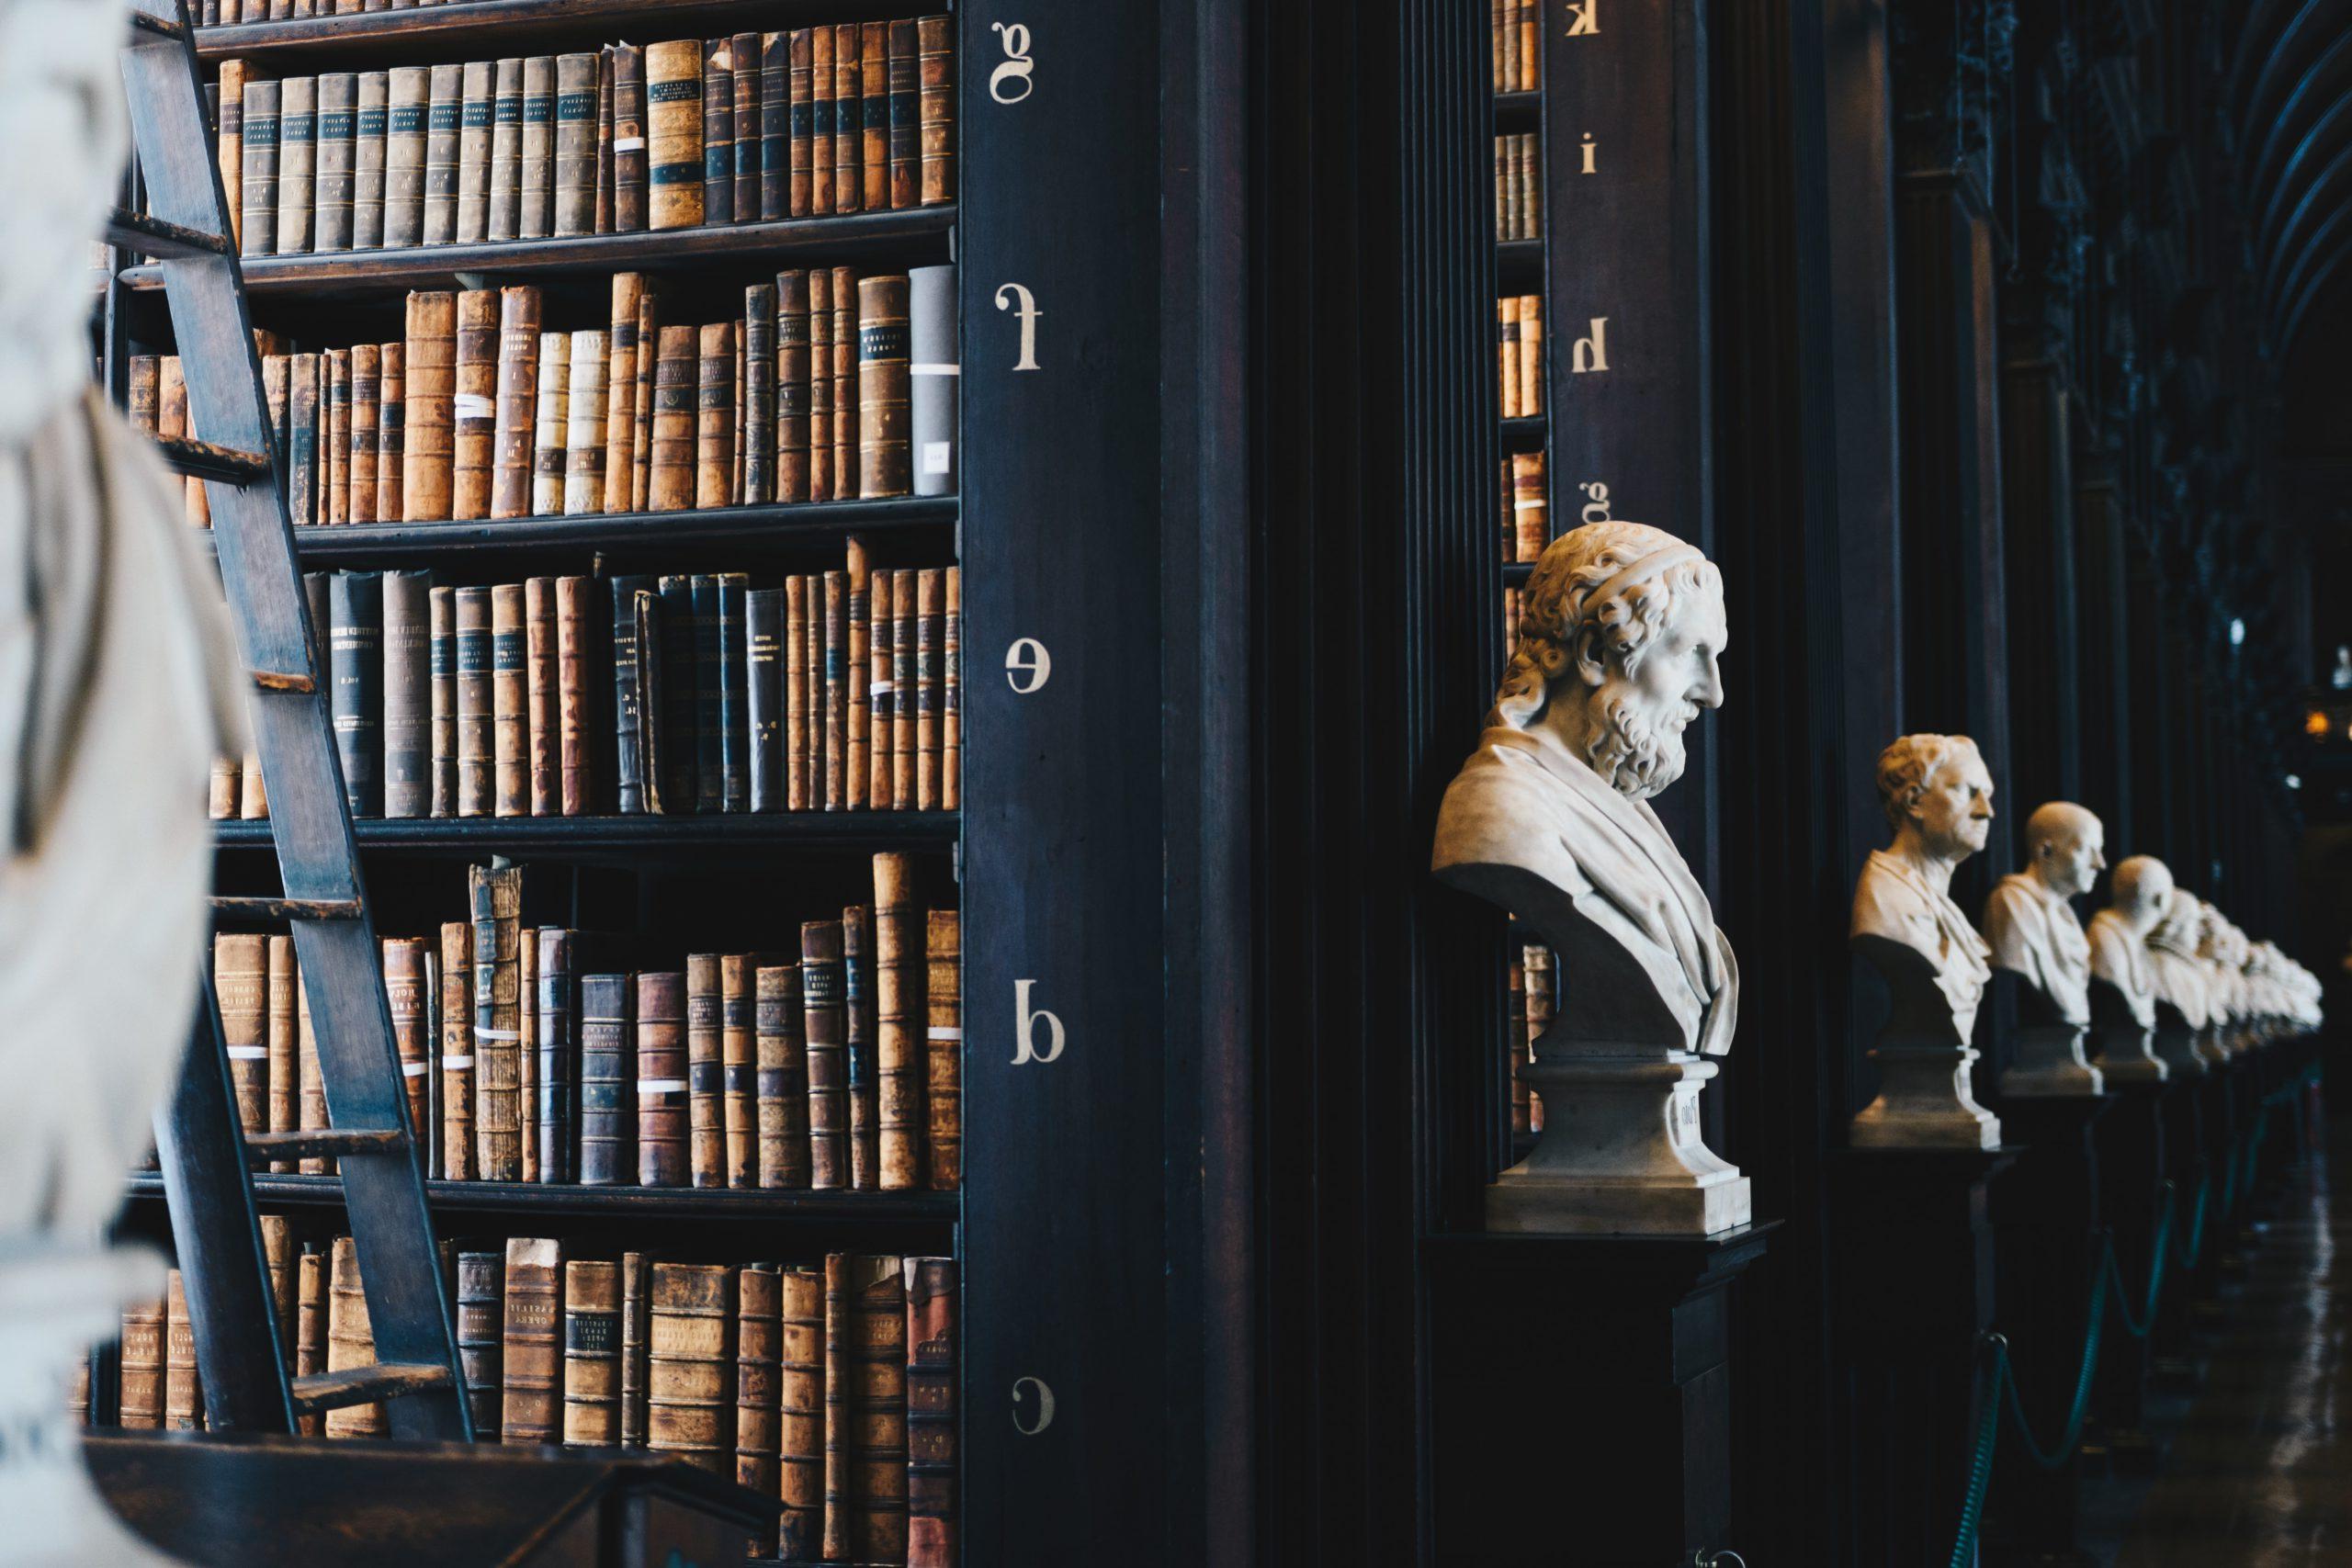 Picture of Busts in a library with books. Photo by Giammarco